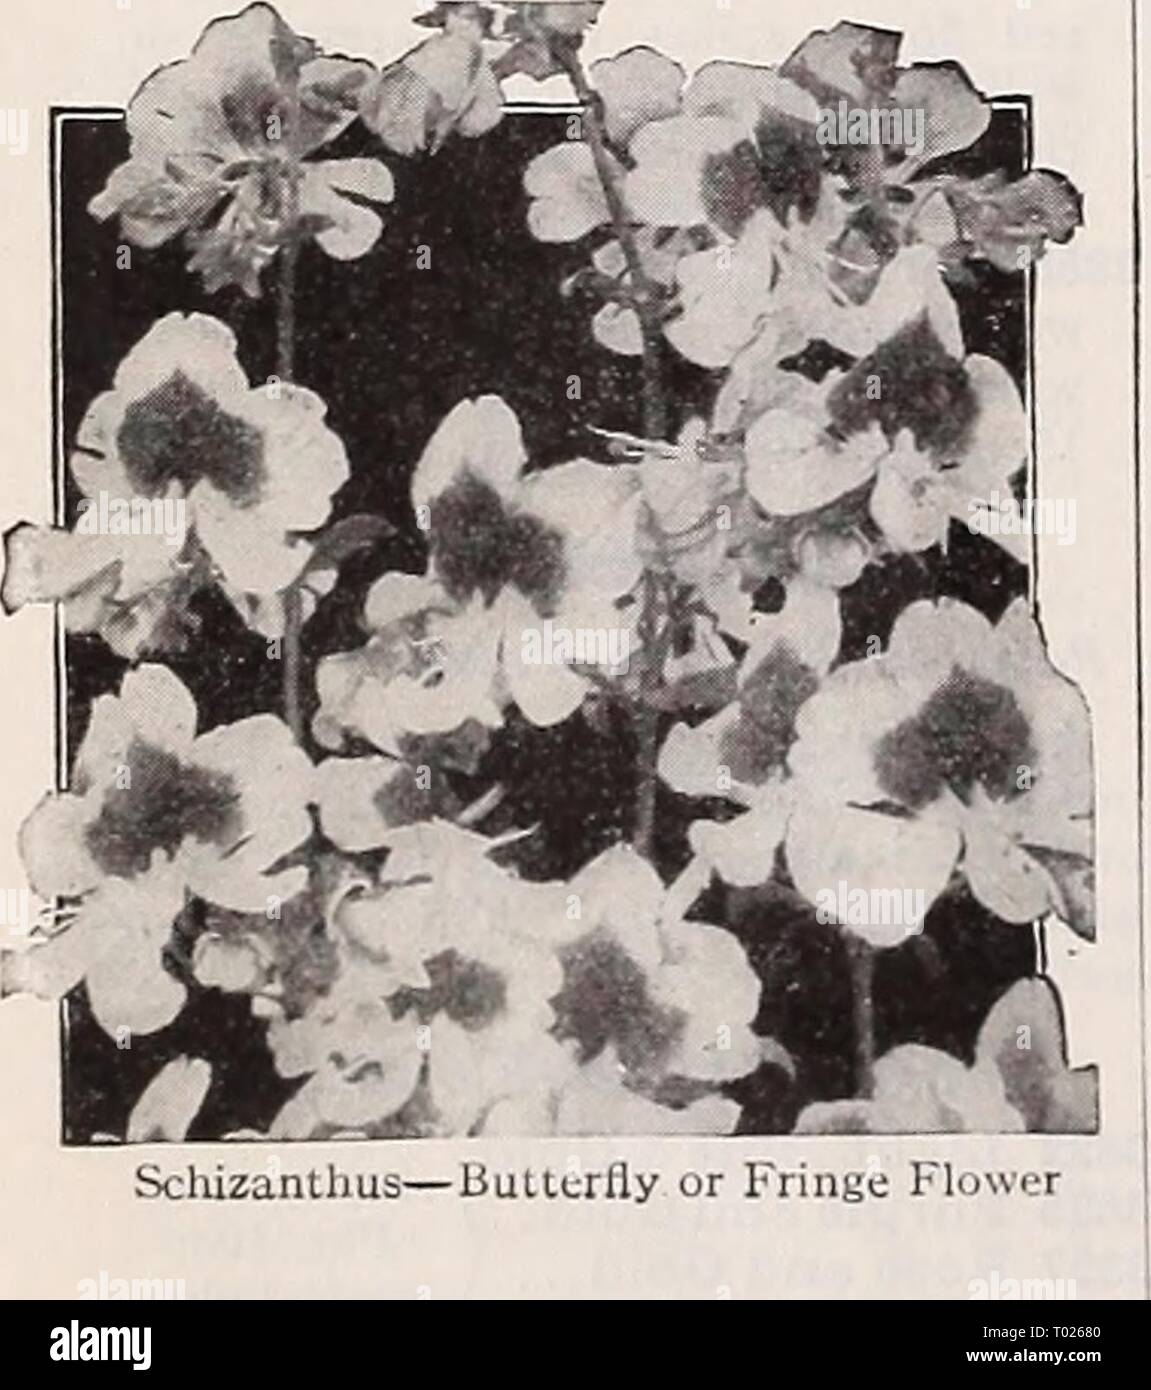 Dreer's garden book for 1940 . dreersgardenbook1940henr Year: 1940  Scabiosa caucasica. Giant Hybrids Pkt. 20c; special pkt. 75c.    ScliizanthusâButlcrlly or Fringe t'lowcr 4830 Collection of Everlastings Acroclinium, Double Mixed Celosia spicata, Mixed - Globe Amaranth, Mixed Helichrysum, Mixed Statice sinuata, Mixed Xeranthemum, Mixed One packet each of these 6 varieties, value 60c, for 40C. Large -Flowering Annual Scabiosa Â® Mourning Bride, Siveet Scabious Pincushion Flower A universal favorite because it is easy to grow and blooms profusely from mid- summer until frost. The beautiful and Stock Photo